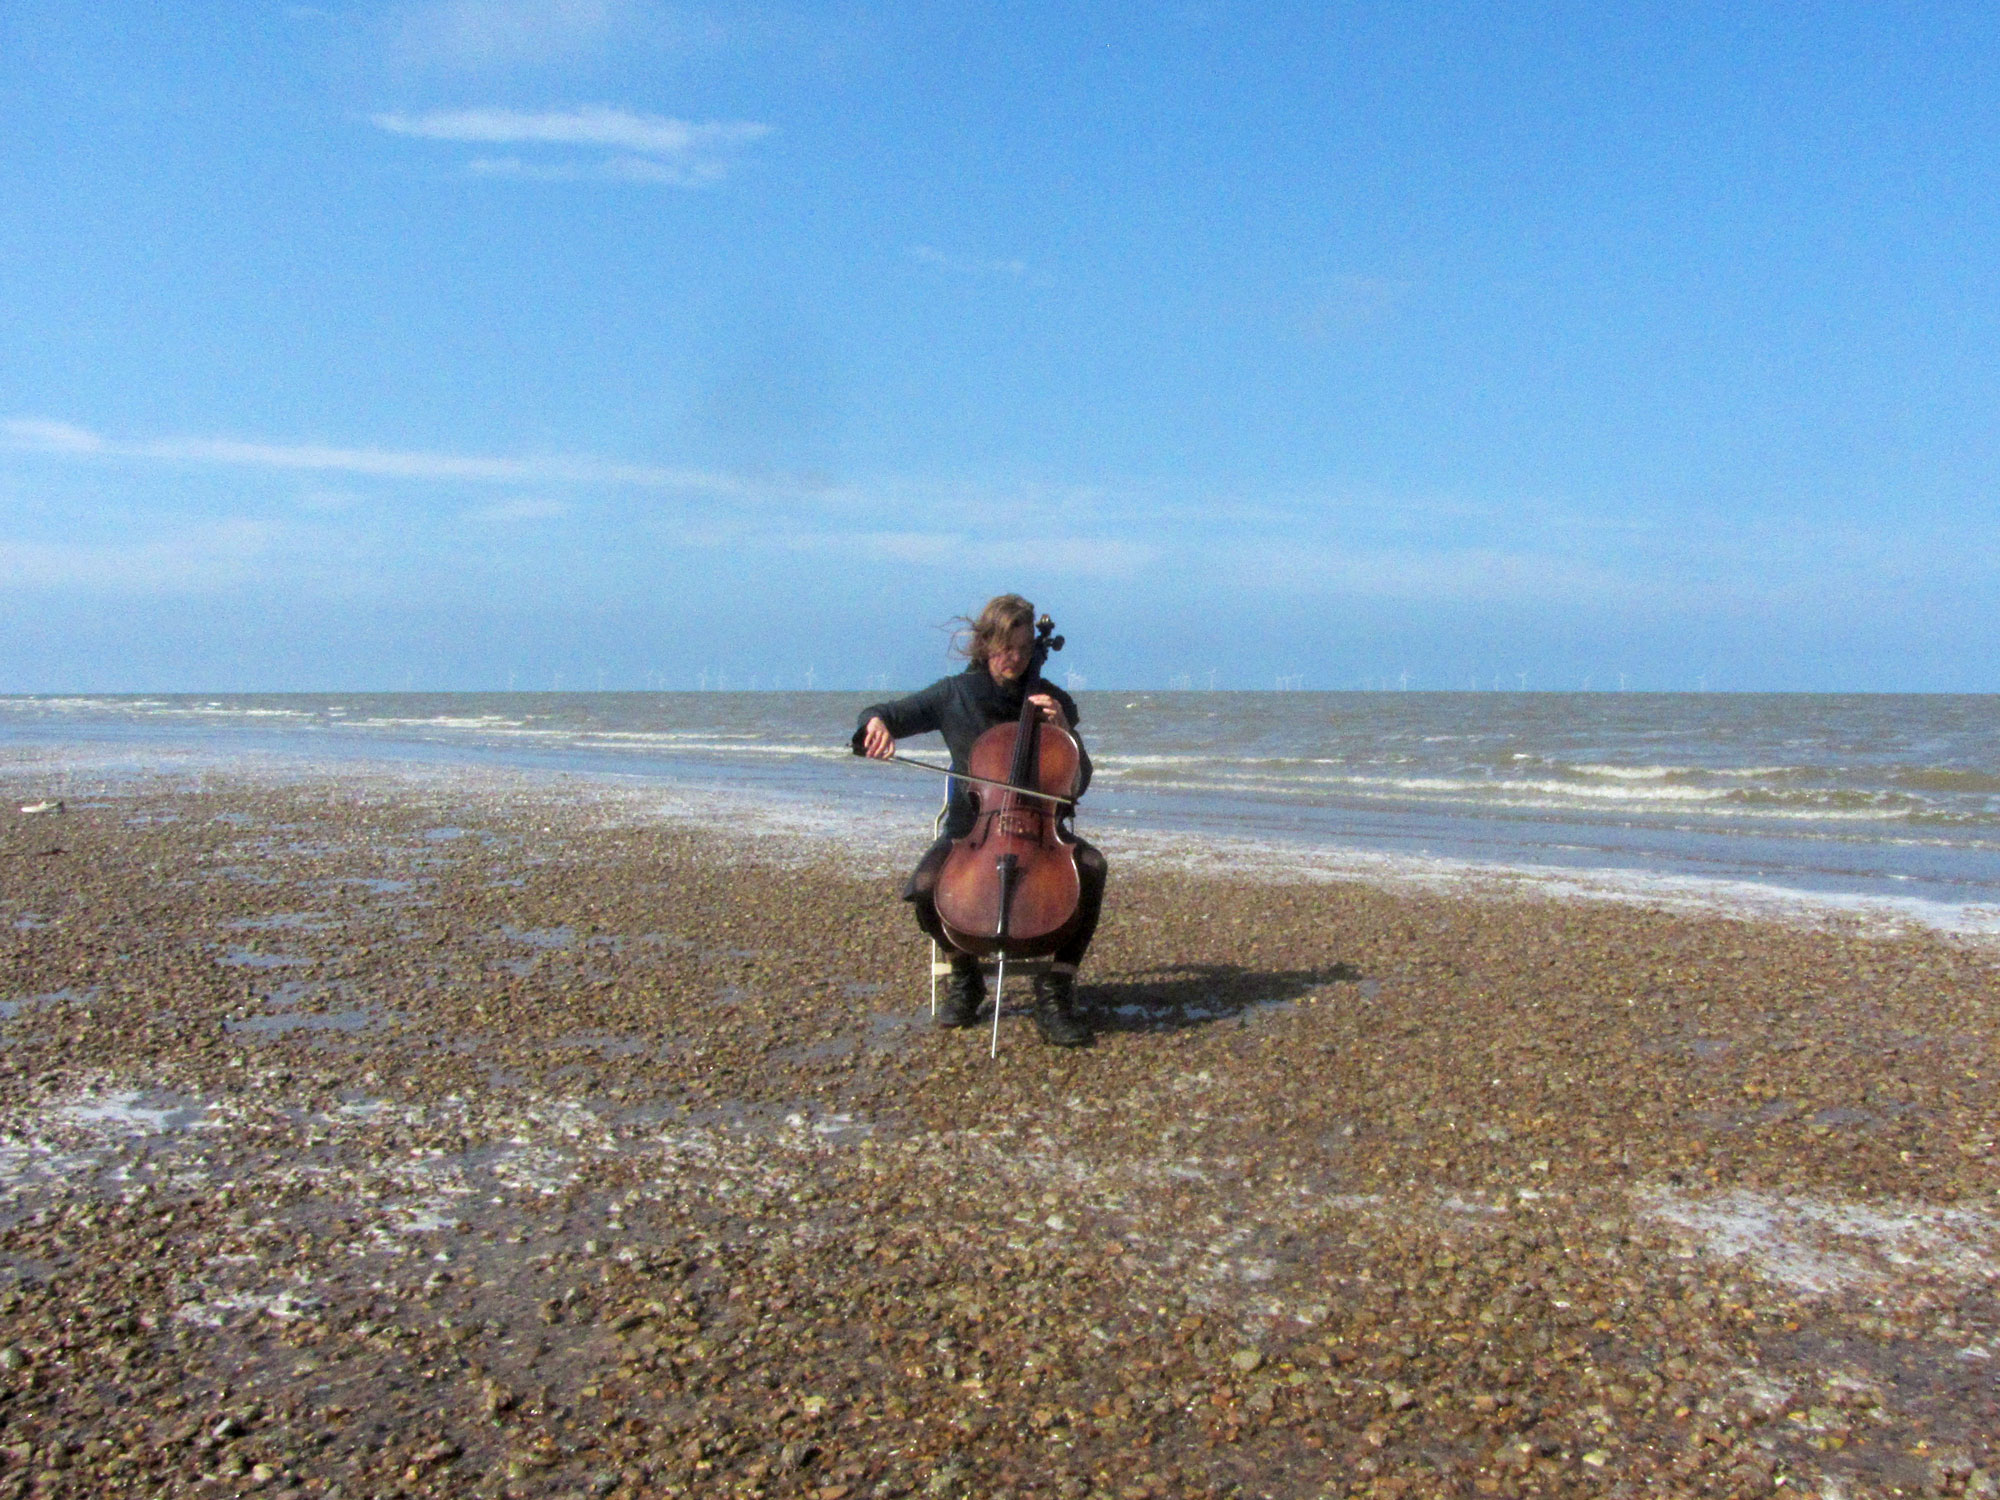 Under a blue sky, on a shingle beach, a woman plays a cello. Behind her we can see the sea.